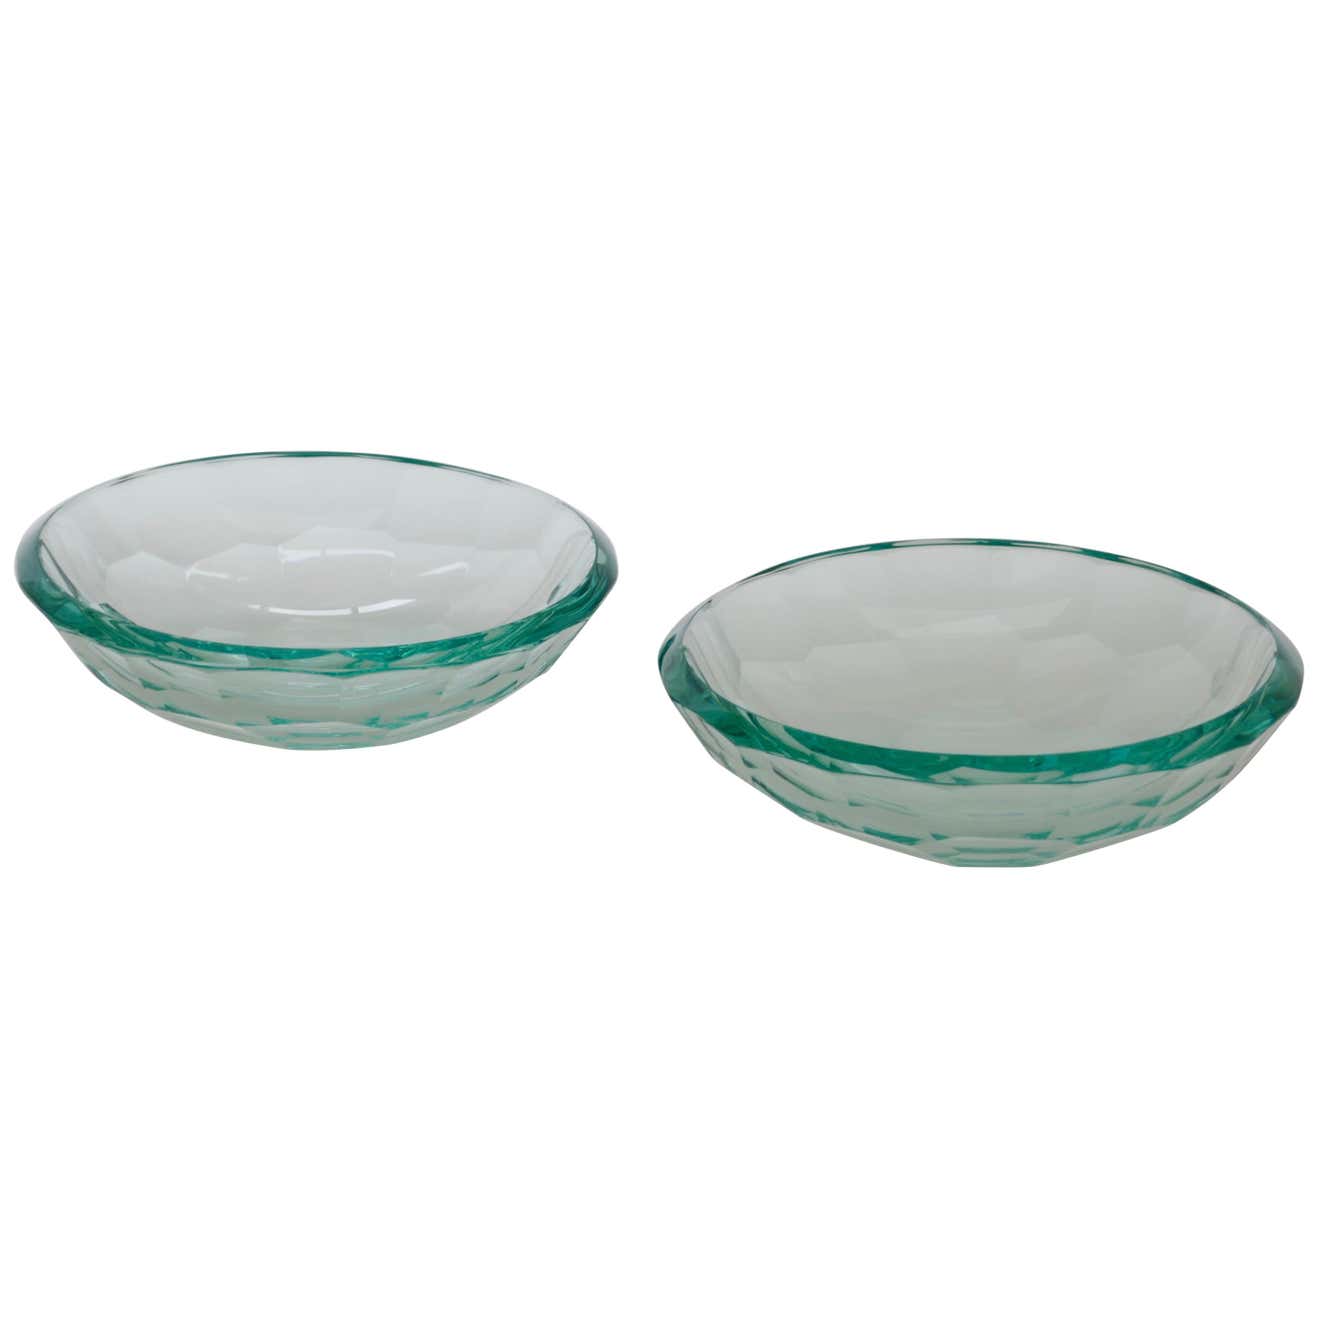 Sold - Pair of Glass Beveled Bowls or Vide Poche, Italy, 1960s